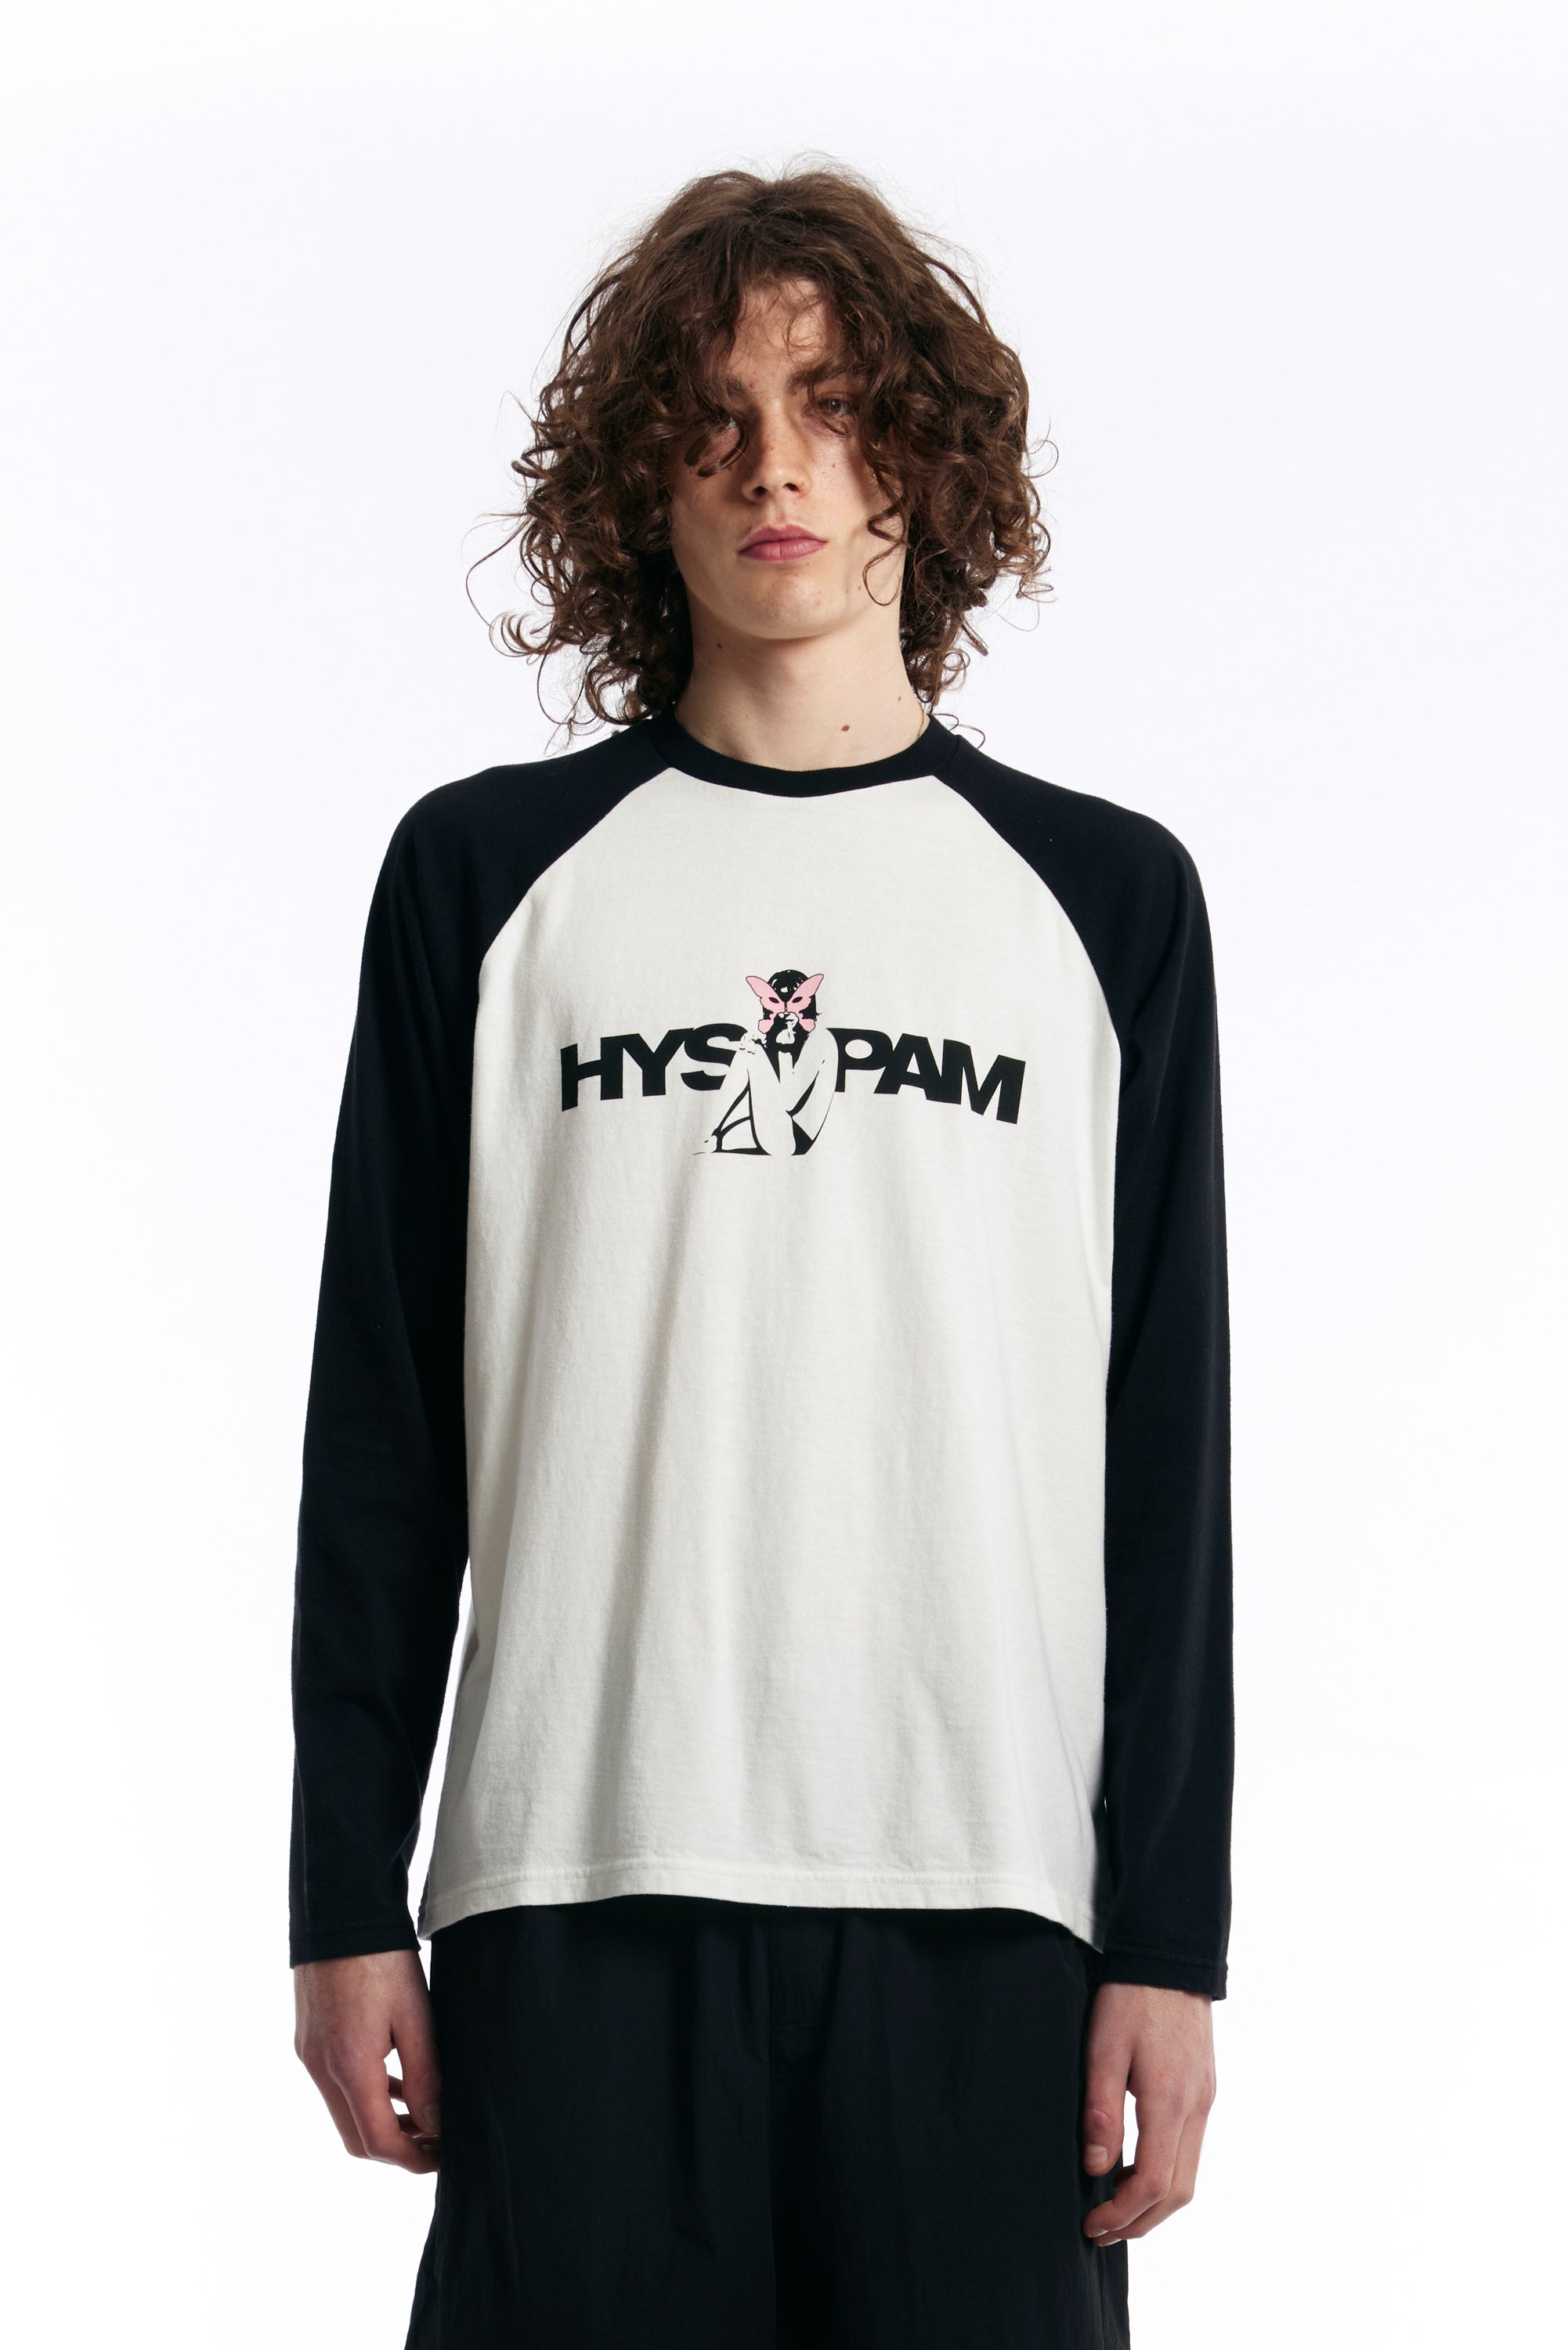 The PAM X HYSTERIC GLAMOUR - ALIEN GIRL LS T SHIRT WHITE/BLACK available online with global shipping, and in PAM Stores Melbourne and Sydney.